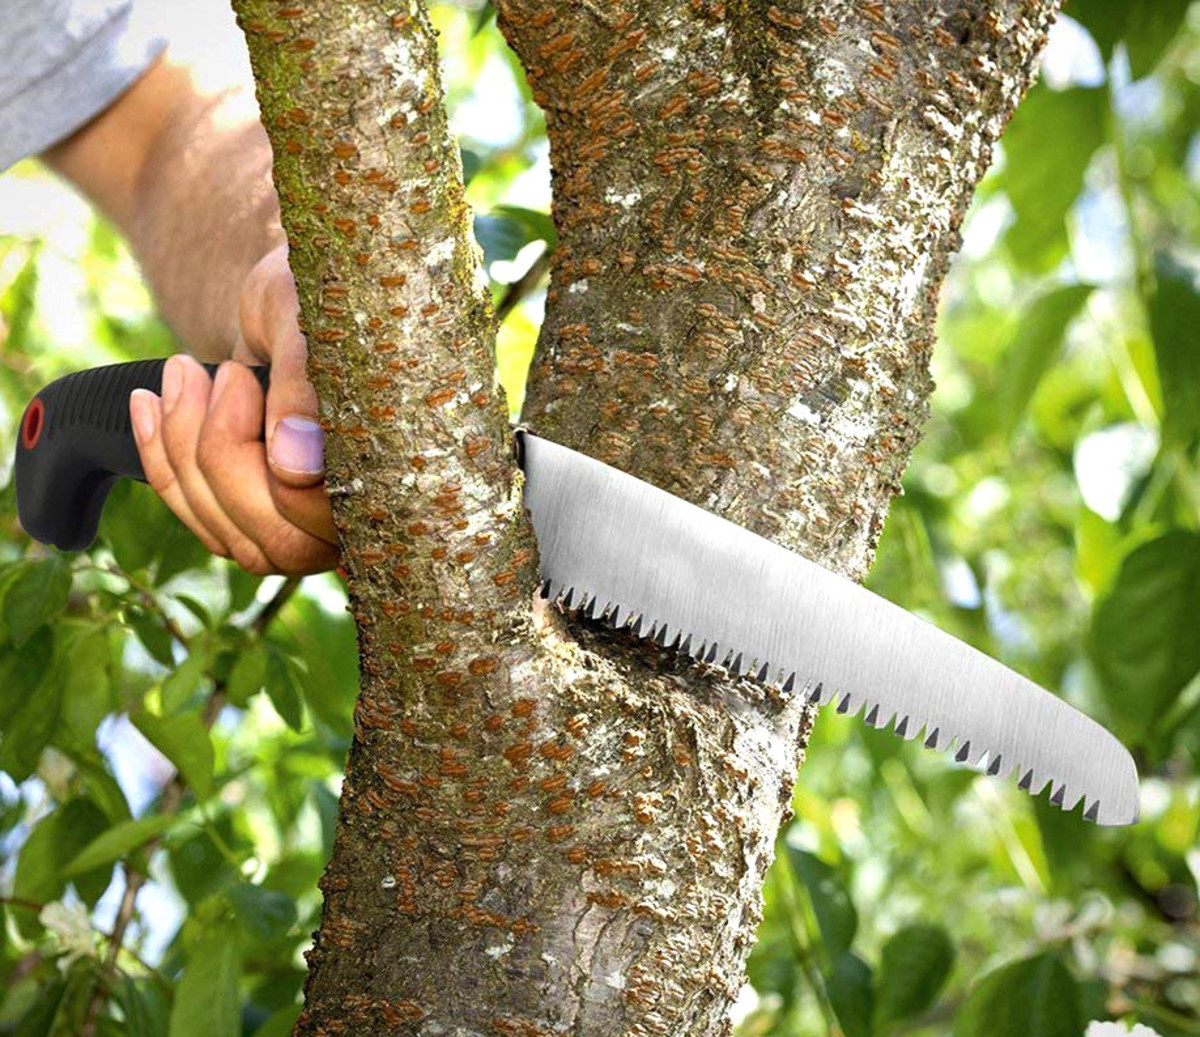 how to use saw to cut tree branches